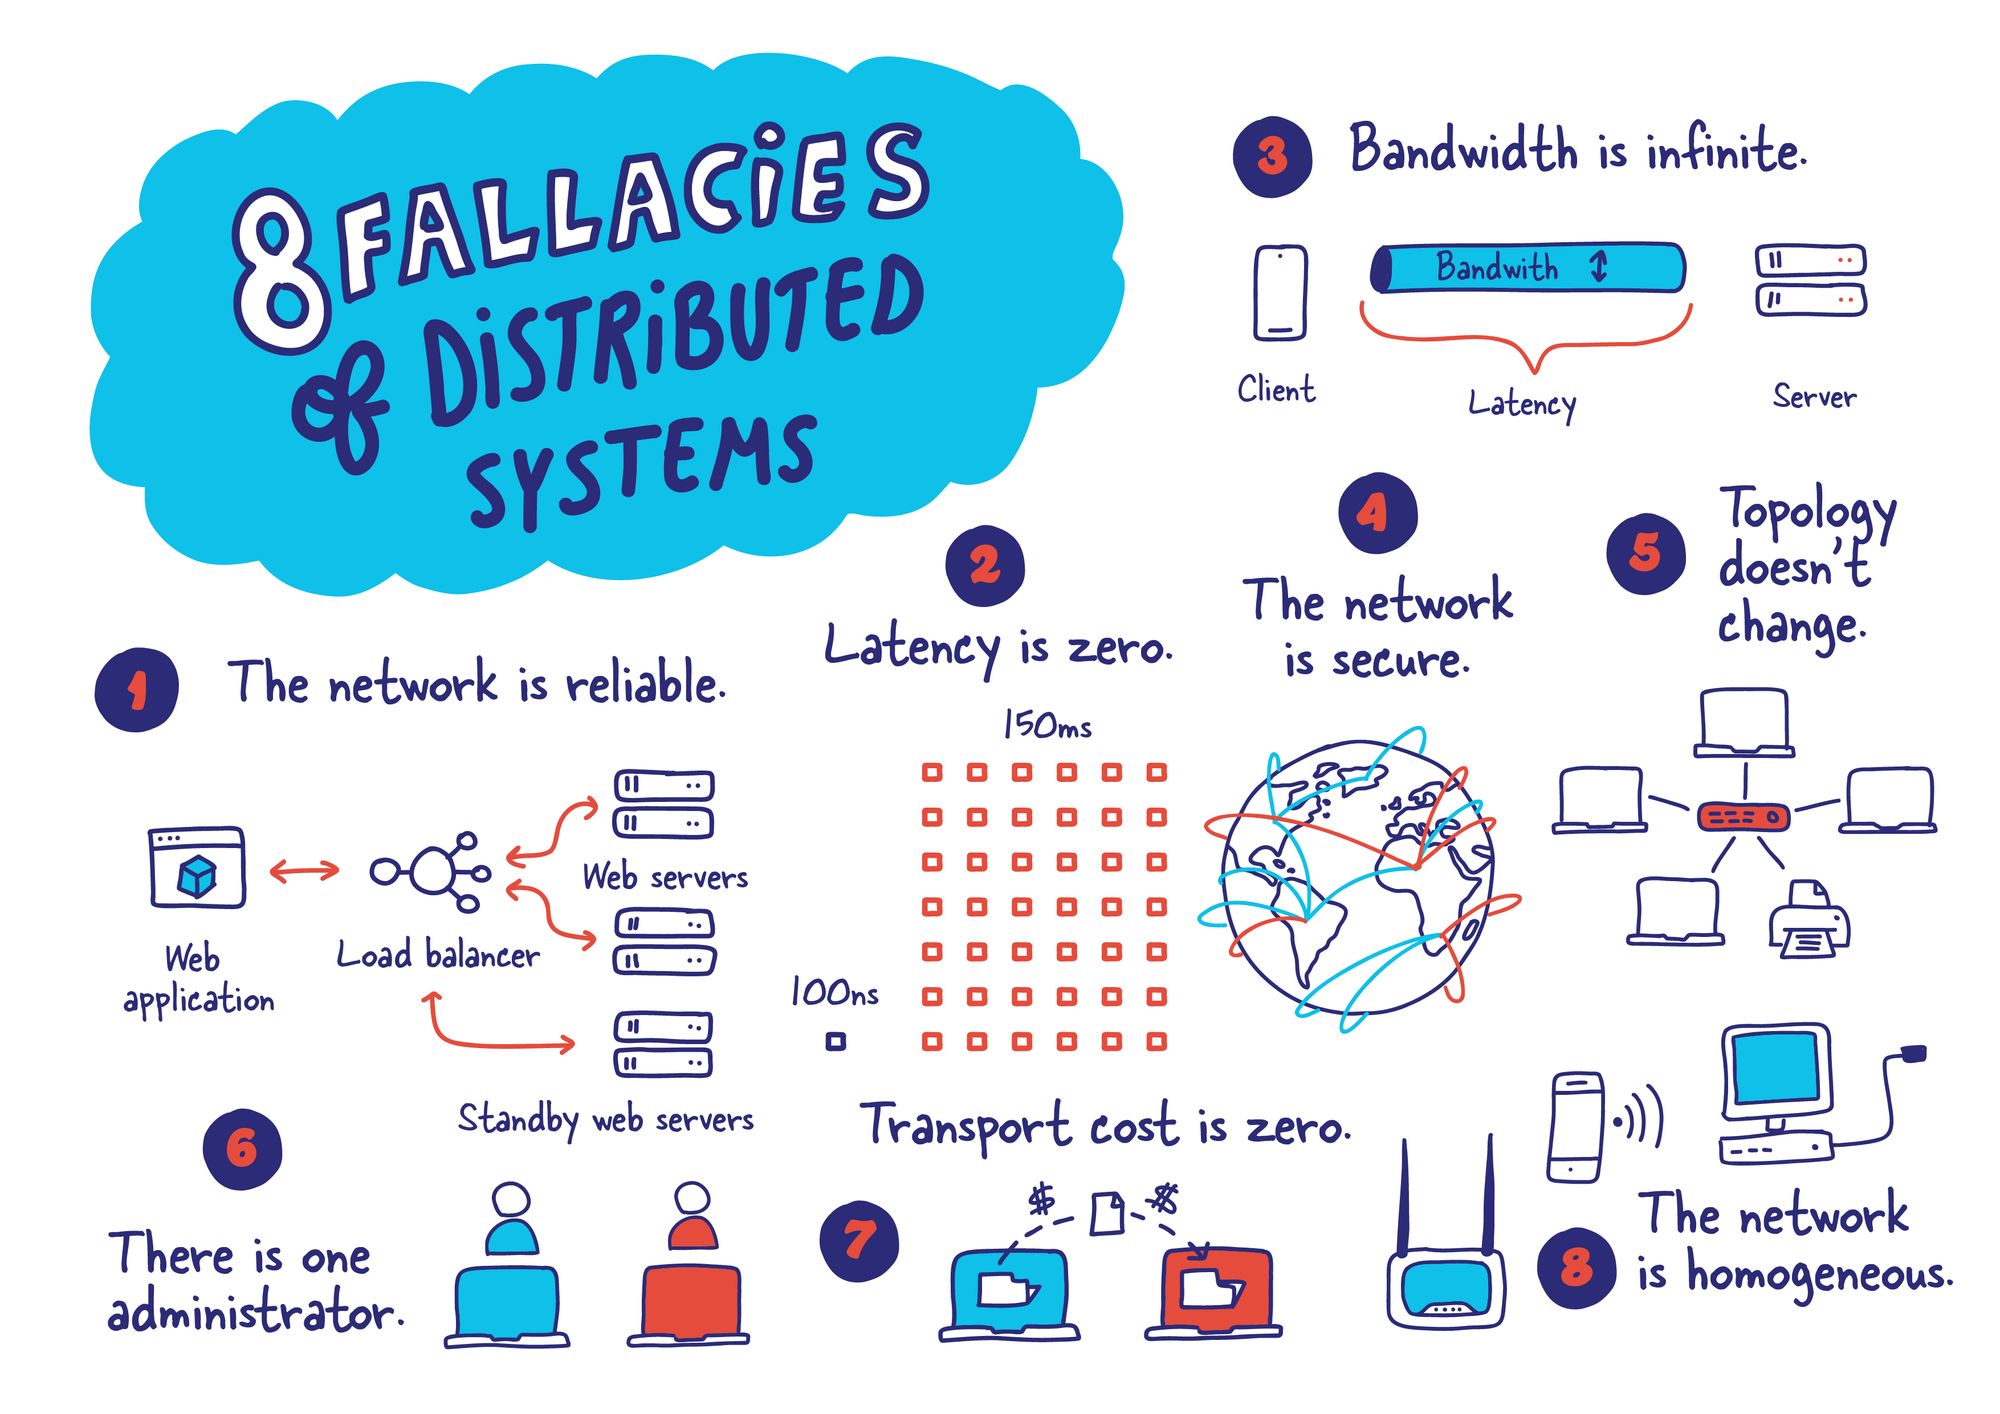 Fallacies of Distributed Systems Infographic